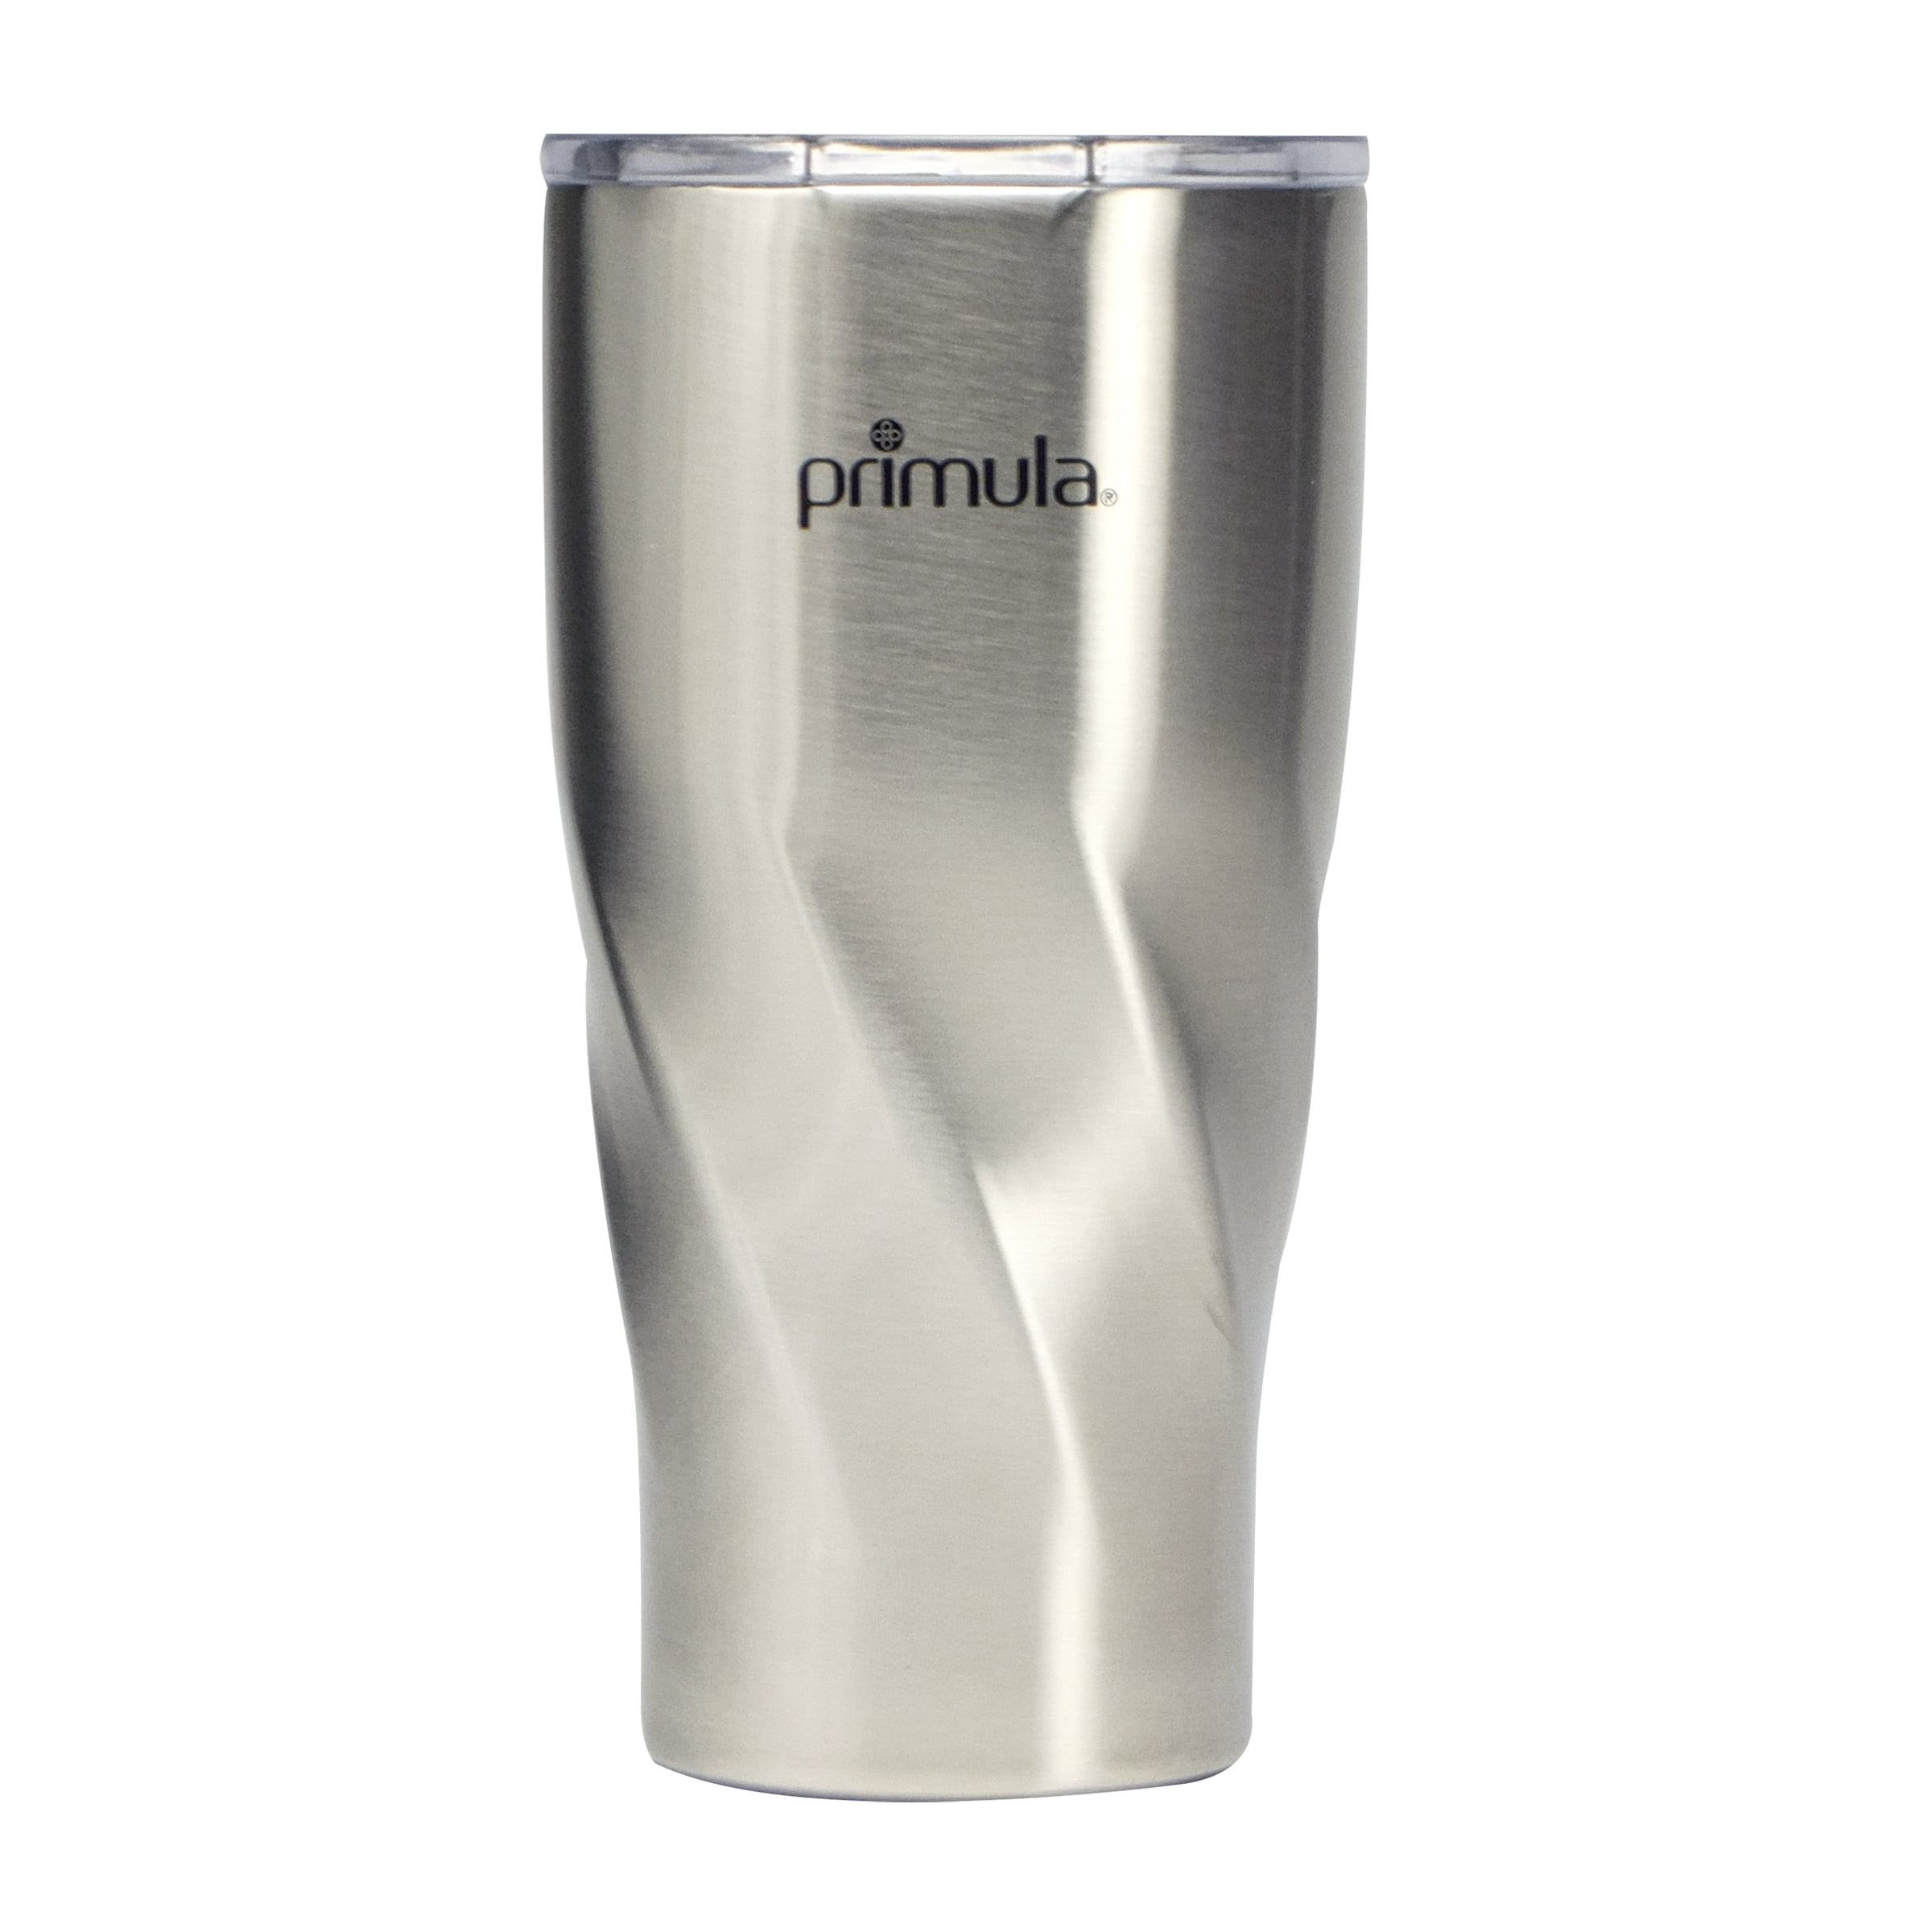 Primula Peak Hot or Cold Thermal Tumbler - Triple Layer Copper  Technology, 20 Ounce, Brushed Stainless Steel: Tumblers & Water Glasses